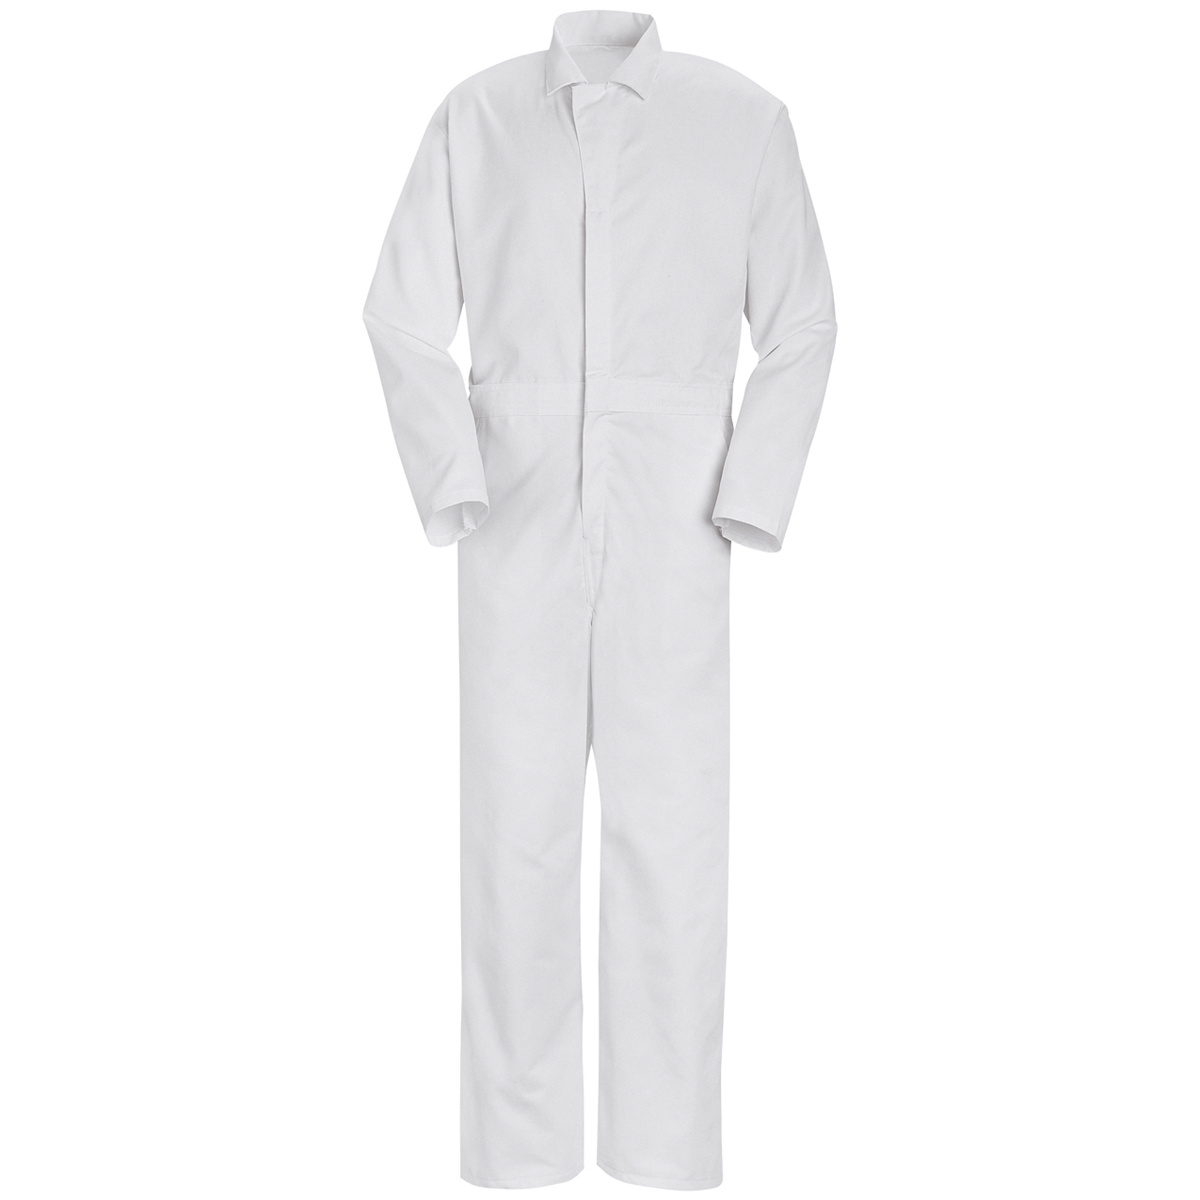 Red Kap® X-Large/Regular White Coveralls With Zipper Closure